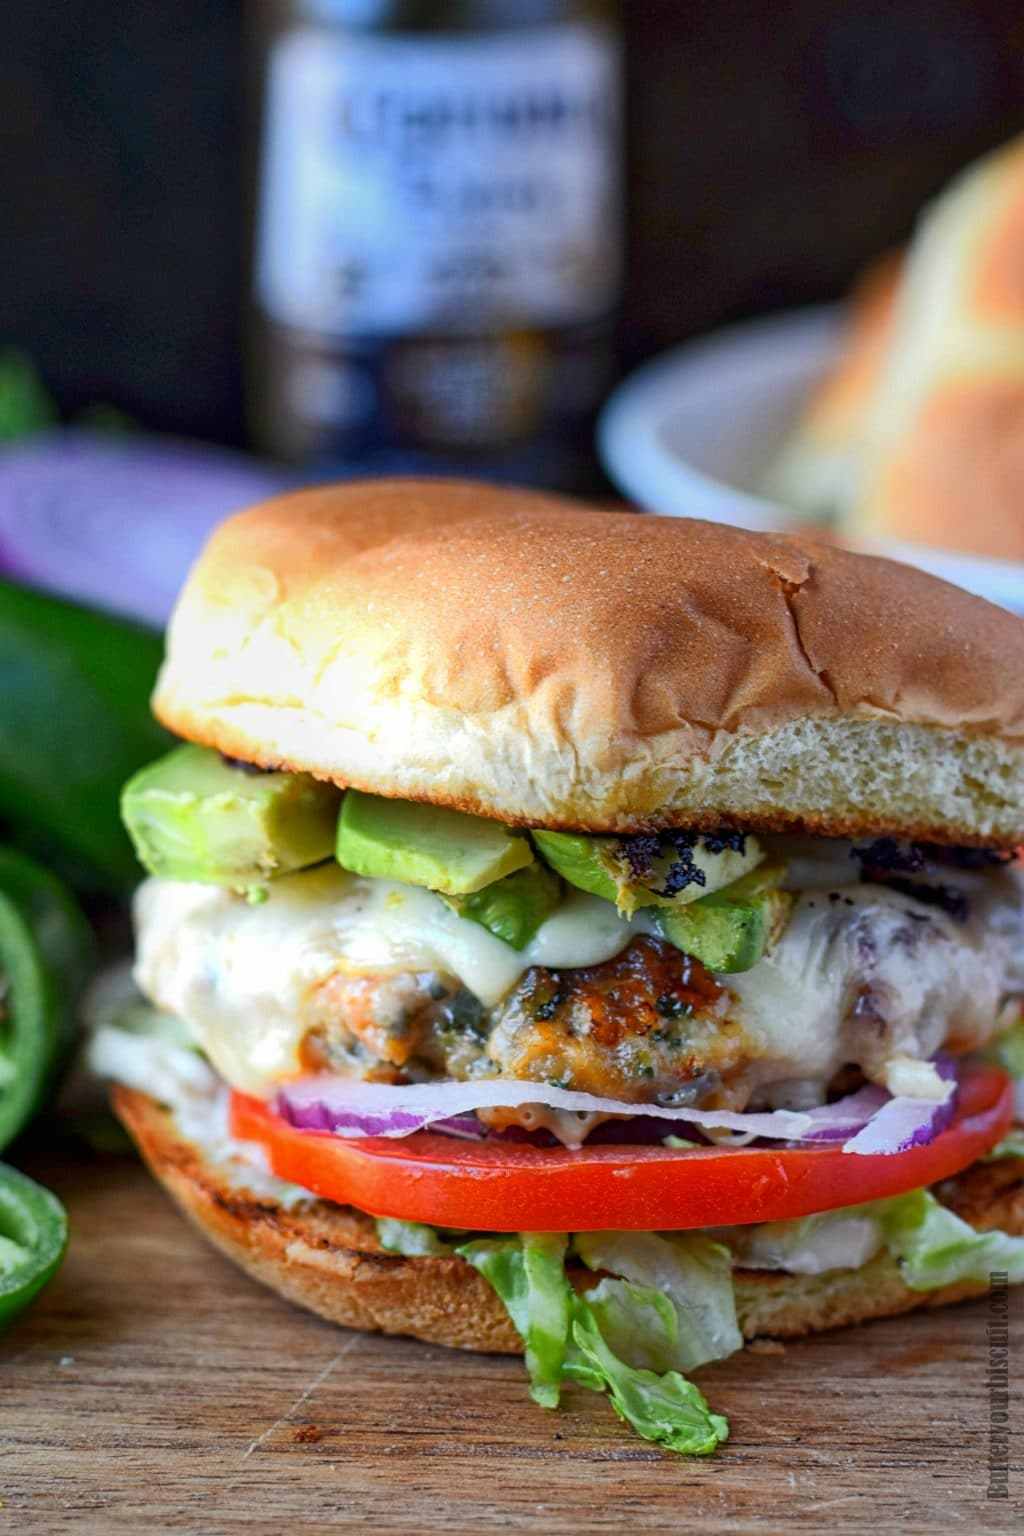 Chicken burger with avocado and tomato.